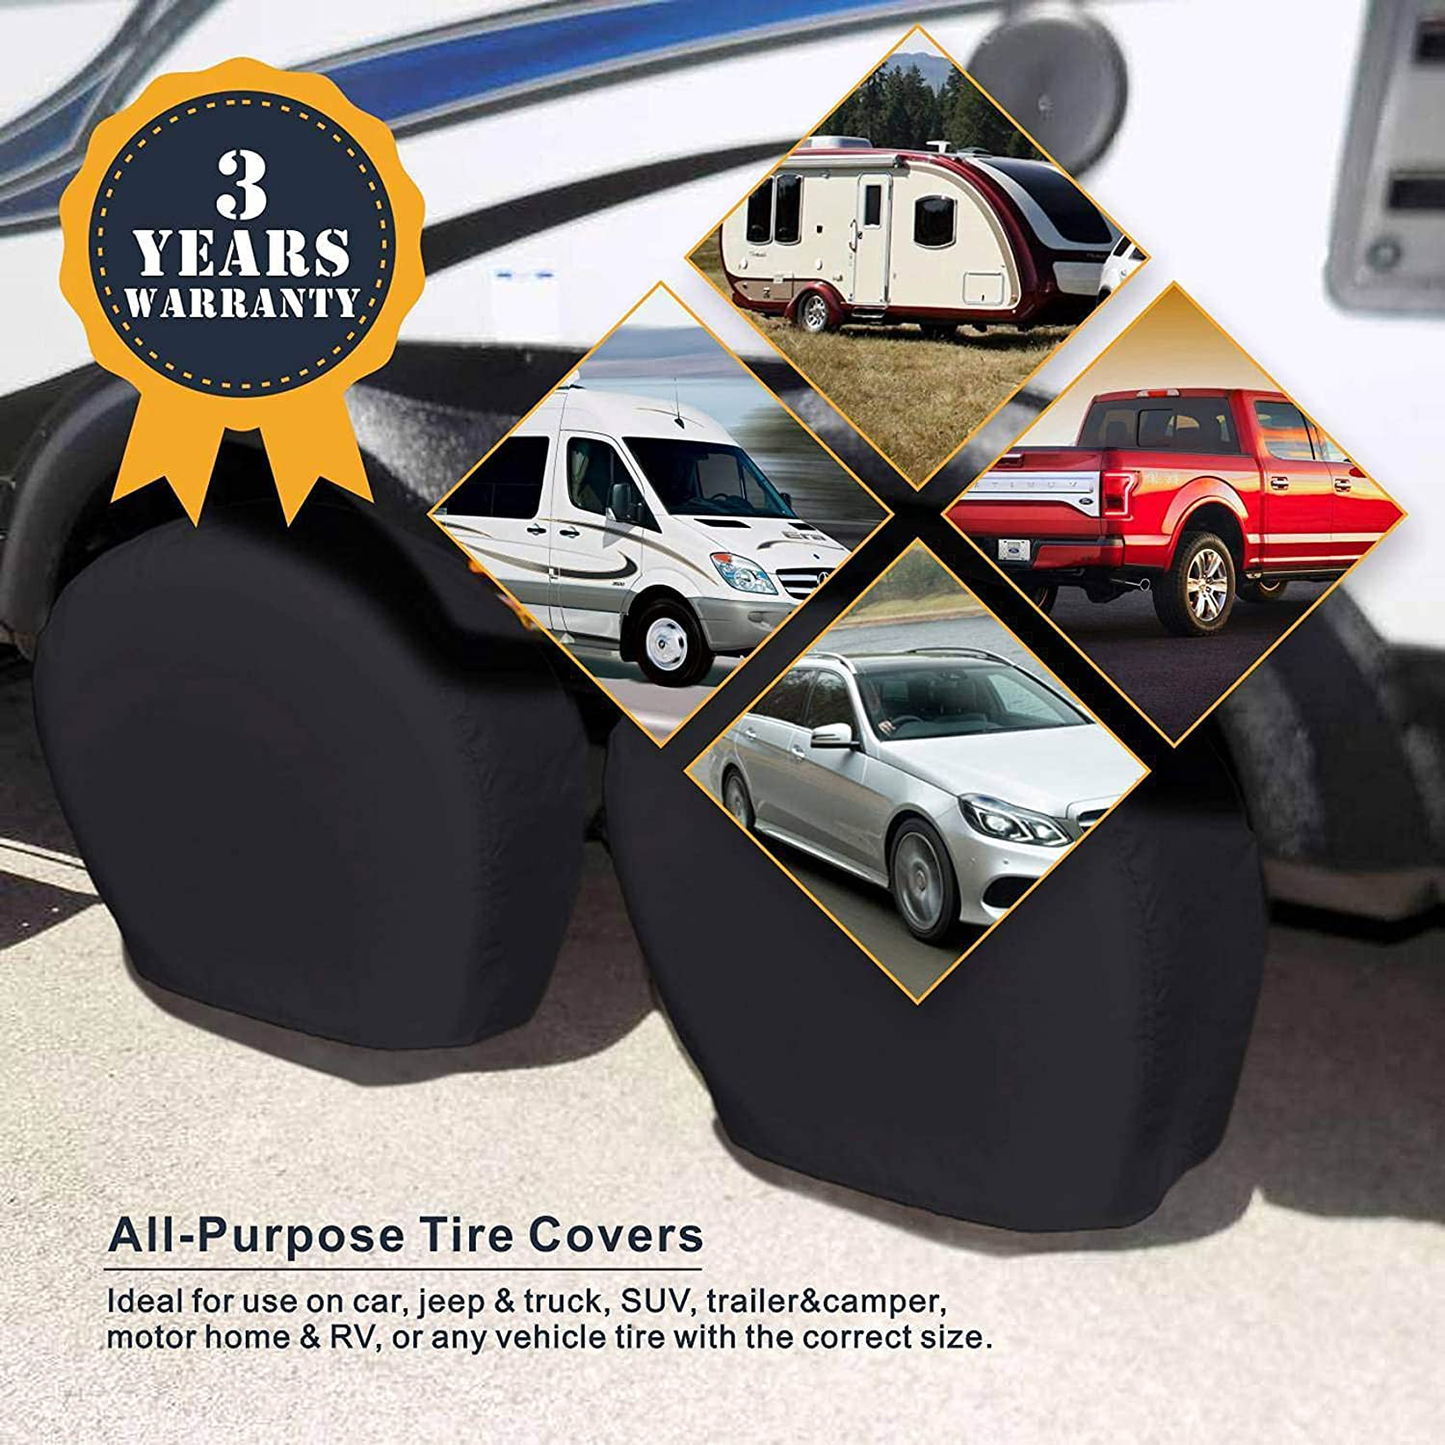 Explore Land Tire Covers 4 Pack - Tough Tire Wheel Protector for Truck, SUV, Trailer, Camper, RV